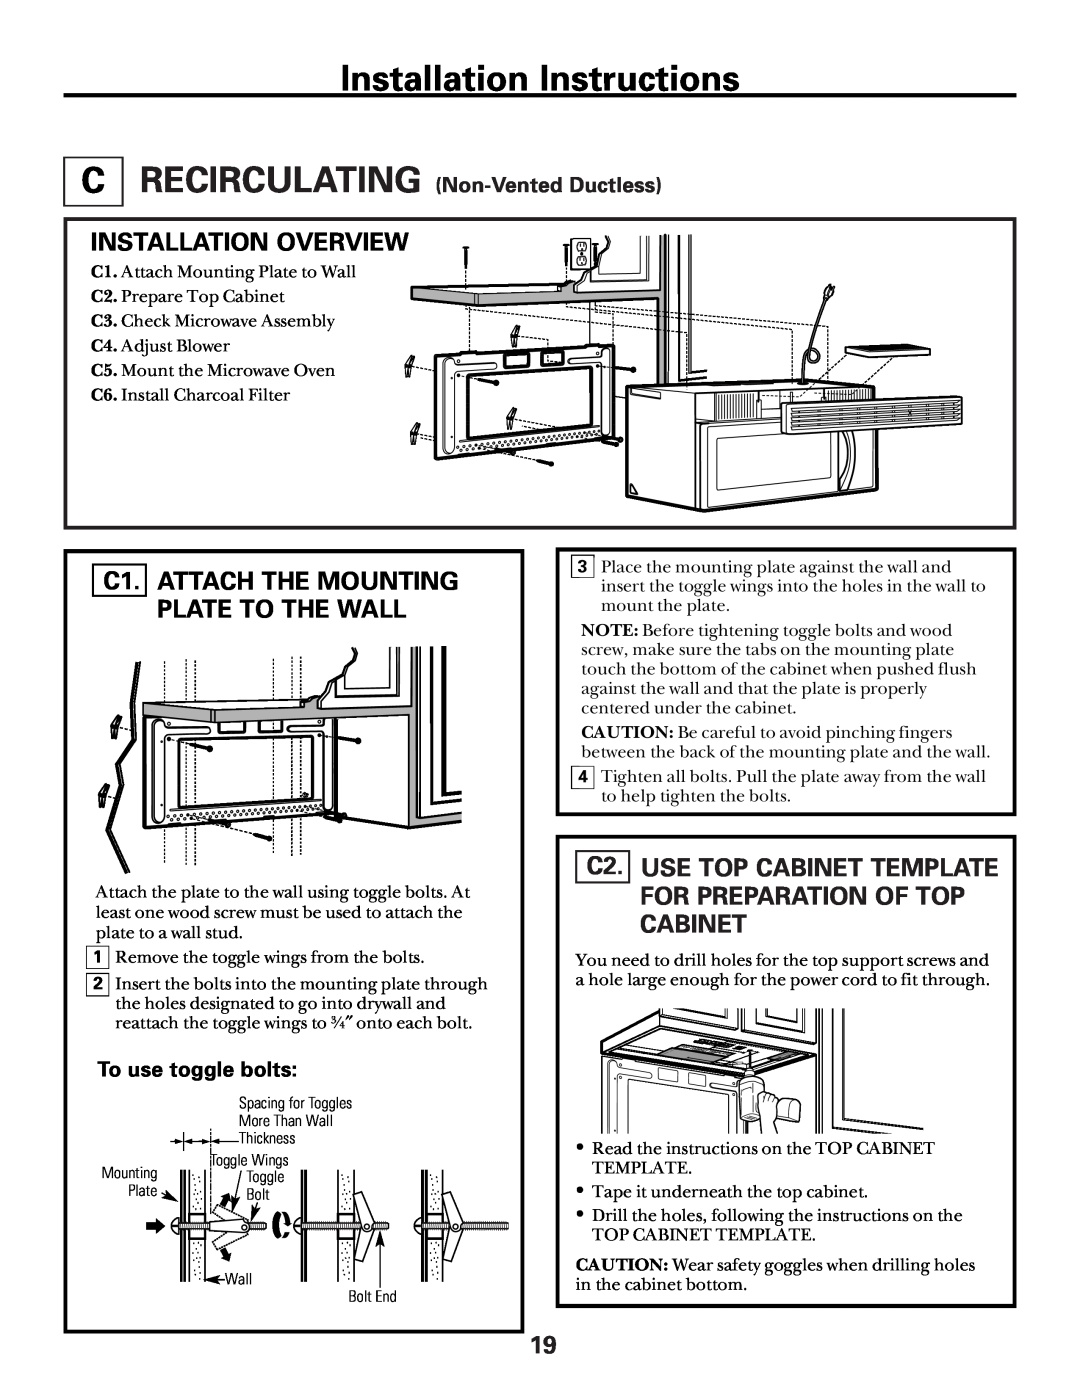 GE Over the Range Microwave Oven manual C1. ATTACH THE MOUNTING PLATE TO THE WALL, RECIRCULATING Non-Vented Ductless 